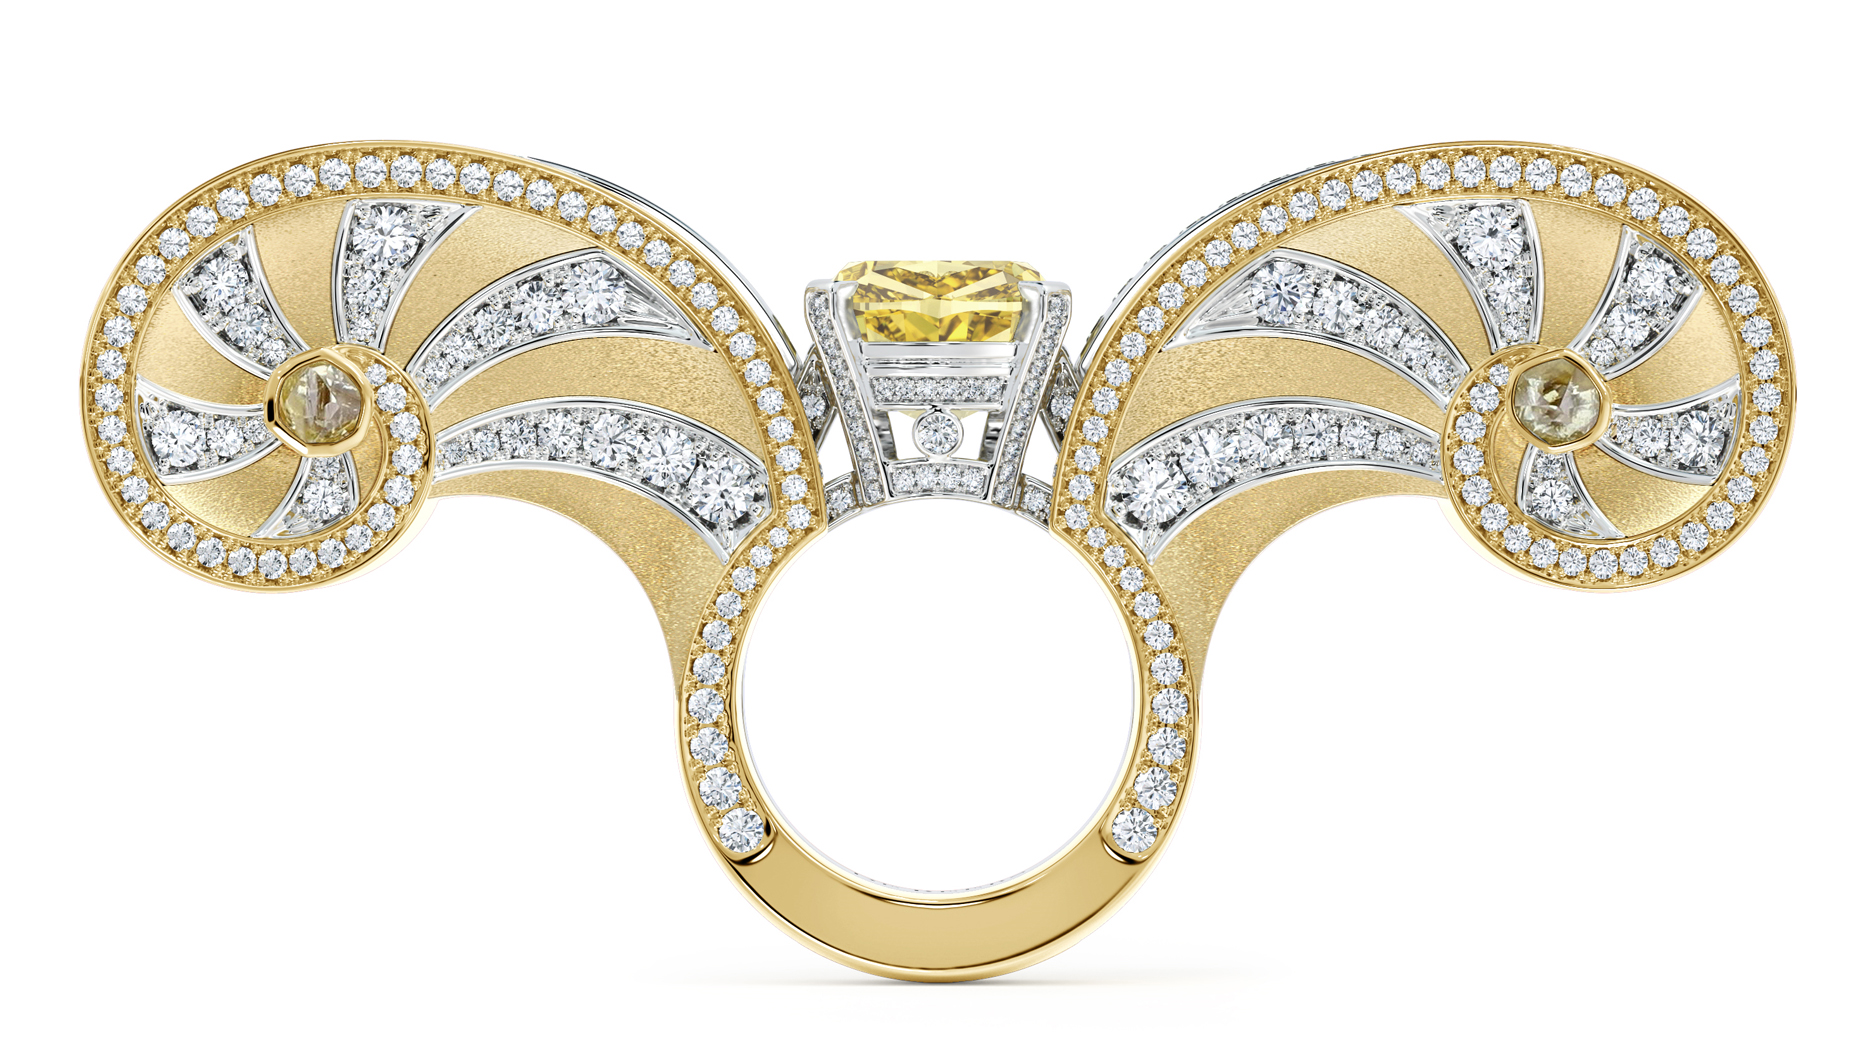 De Beers New High Jewelry Collection Embraces Seasonal Style